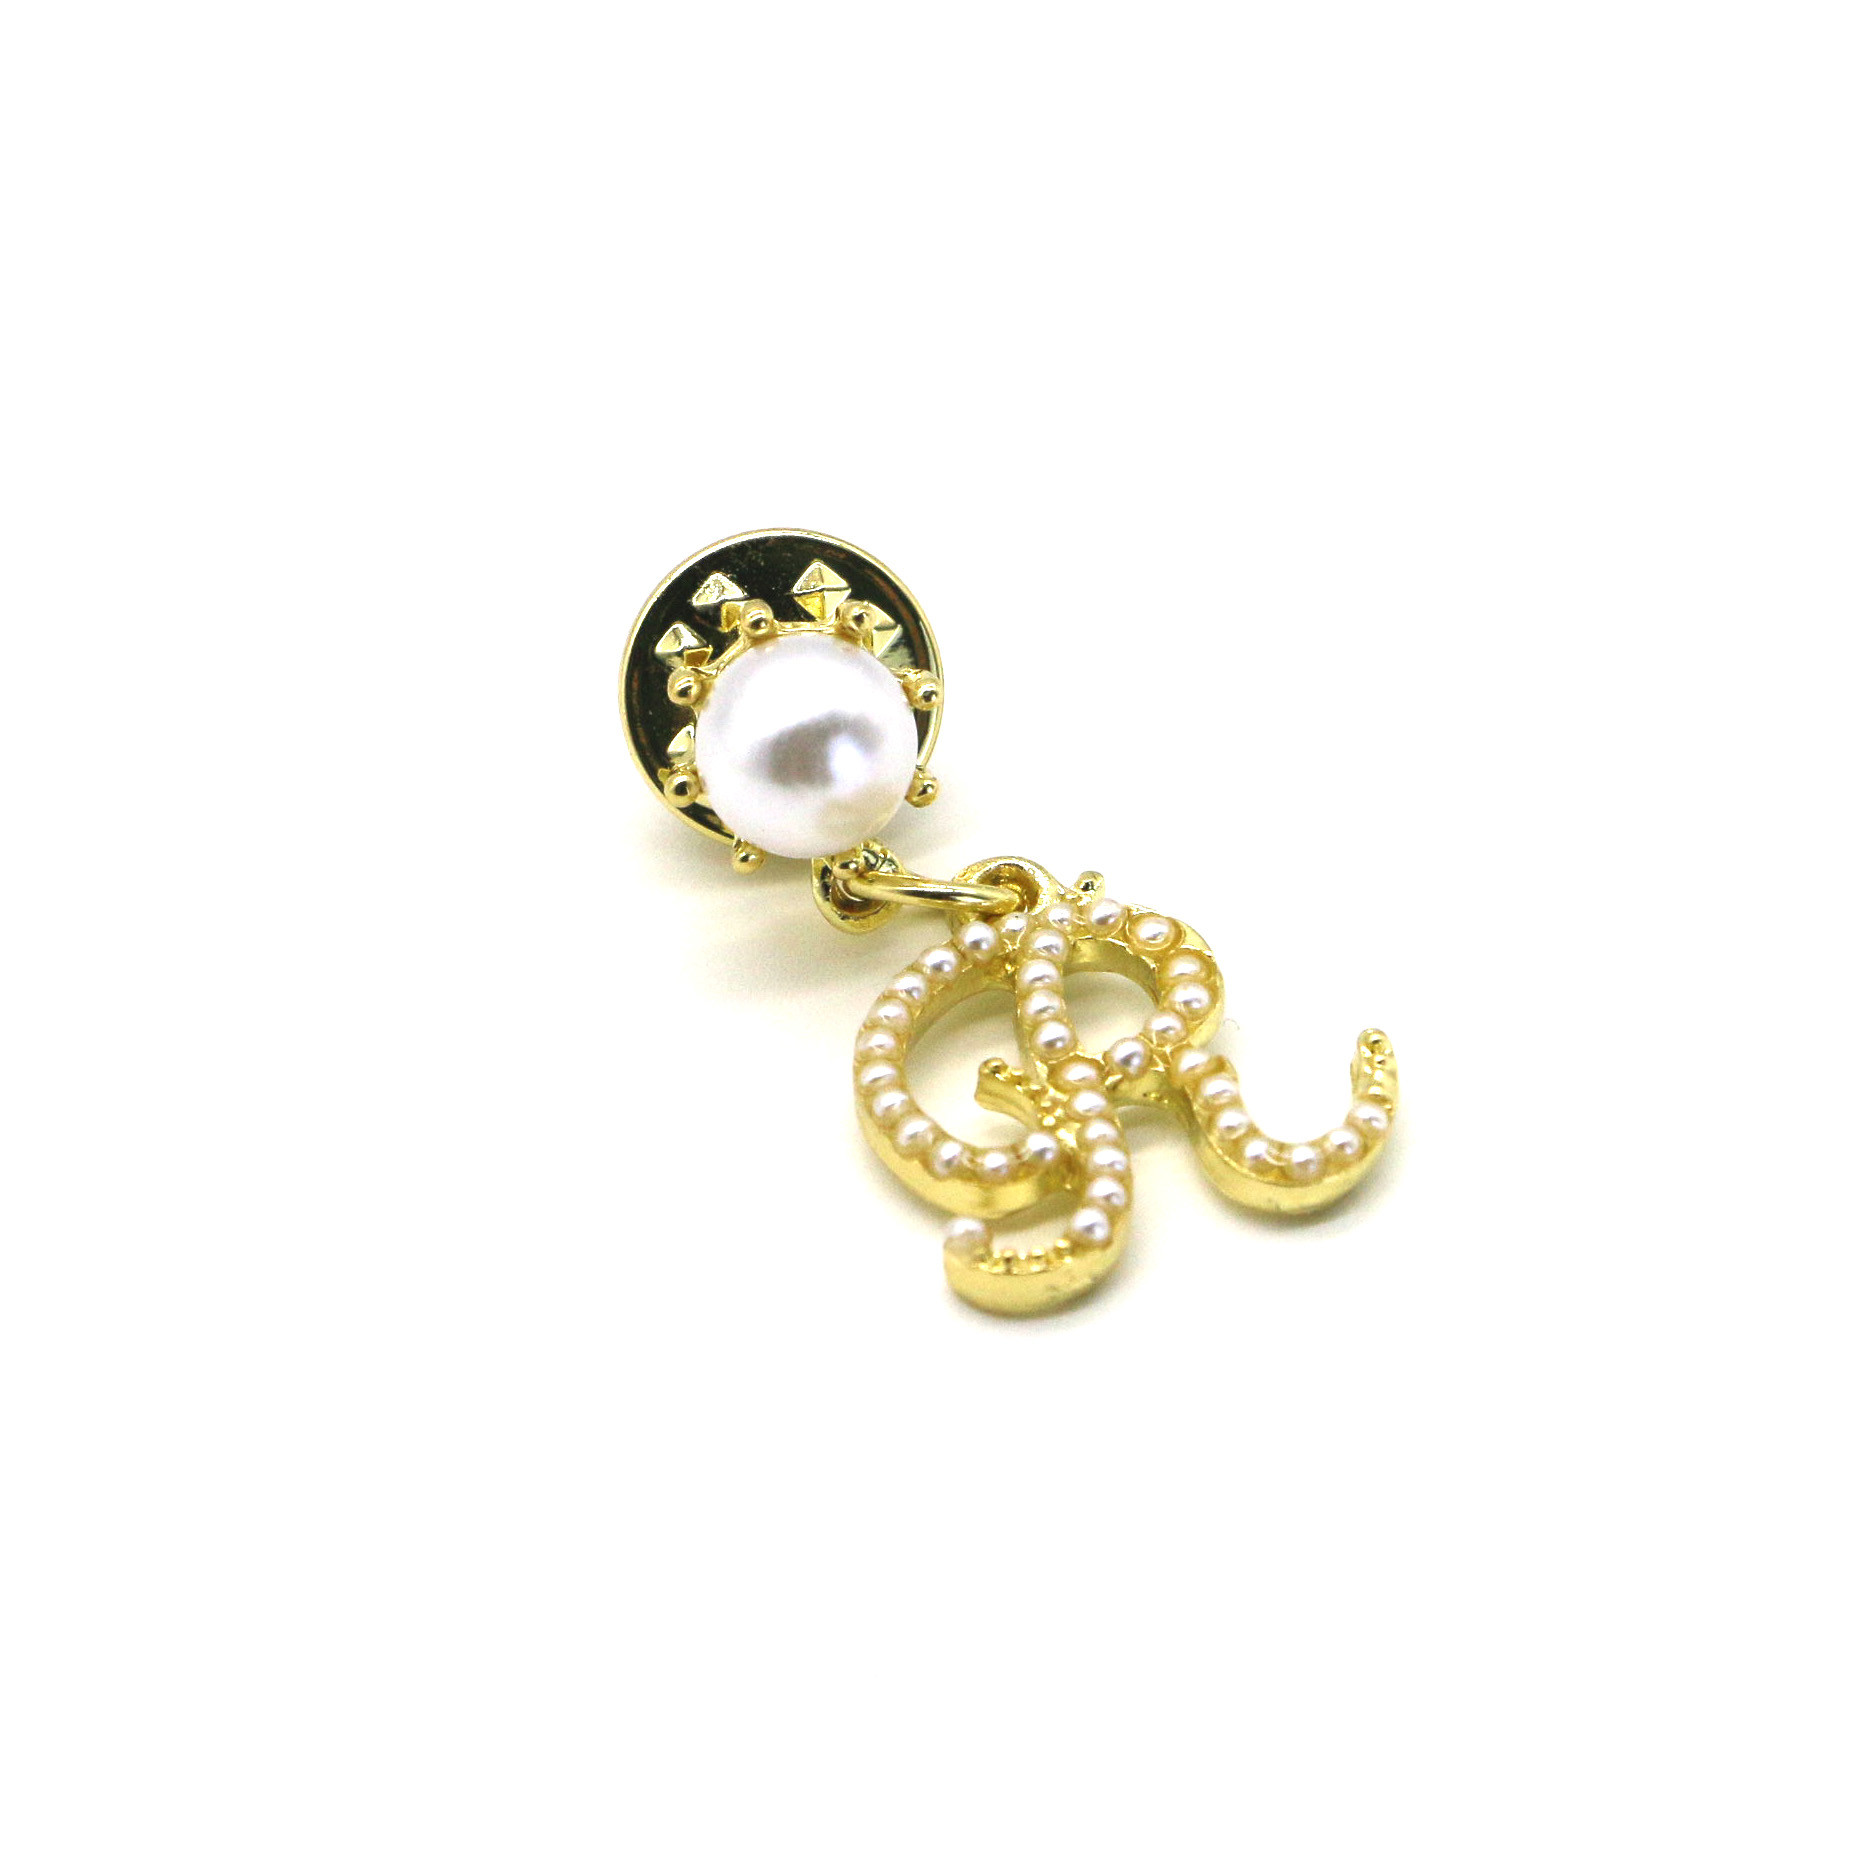 Alloy Collar Lapel Pin Claw Inlaid Pearl Gold Silver Color OEM